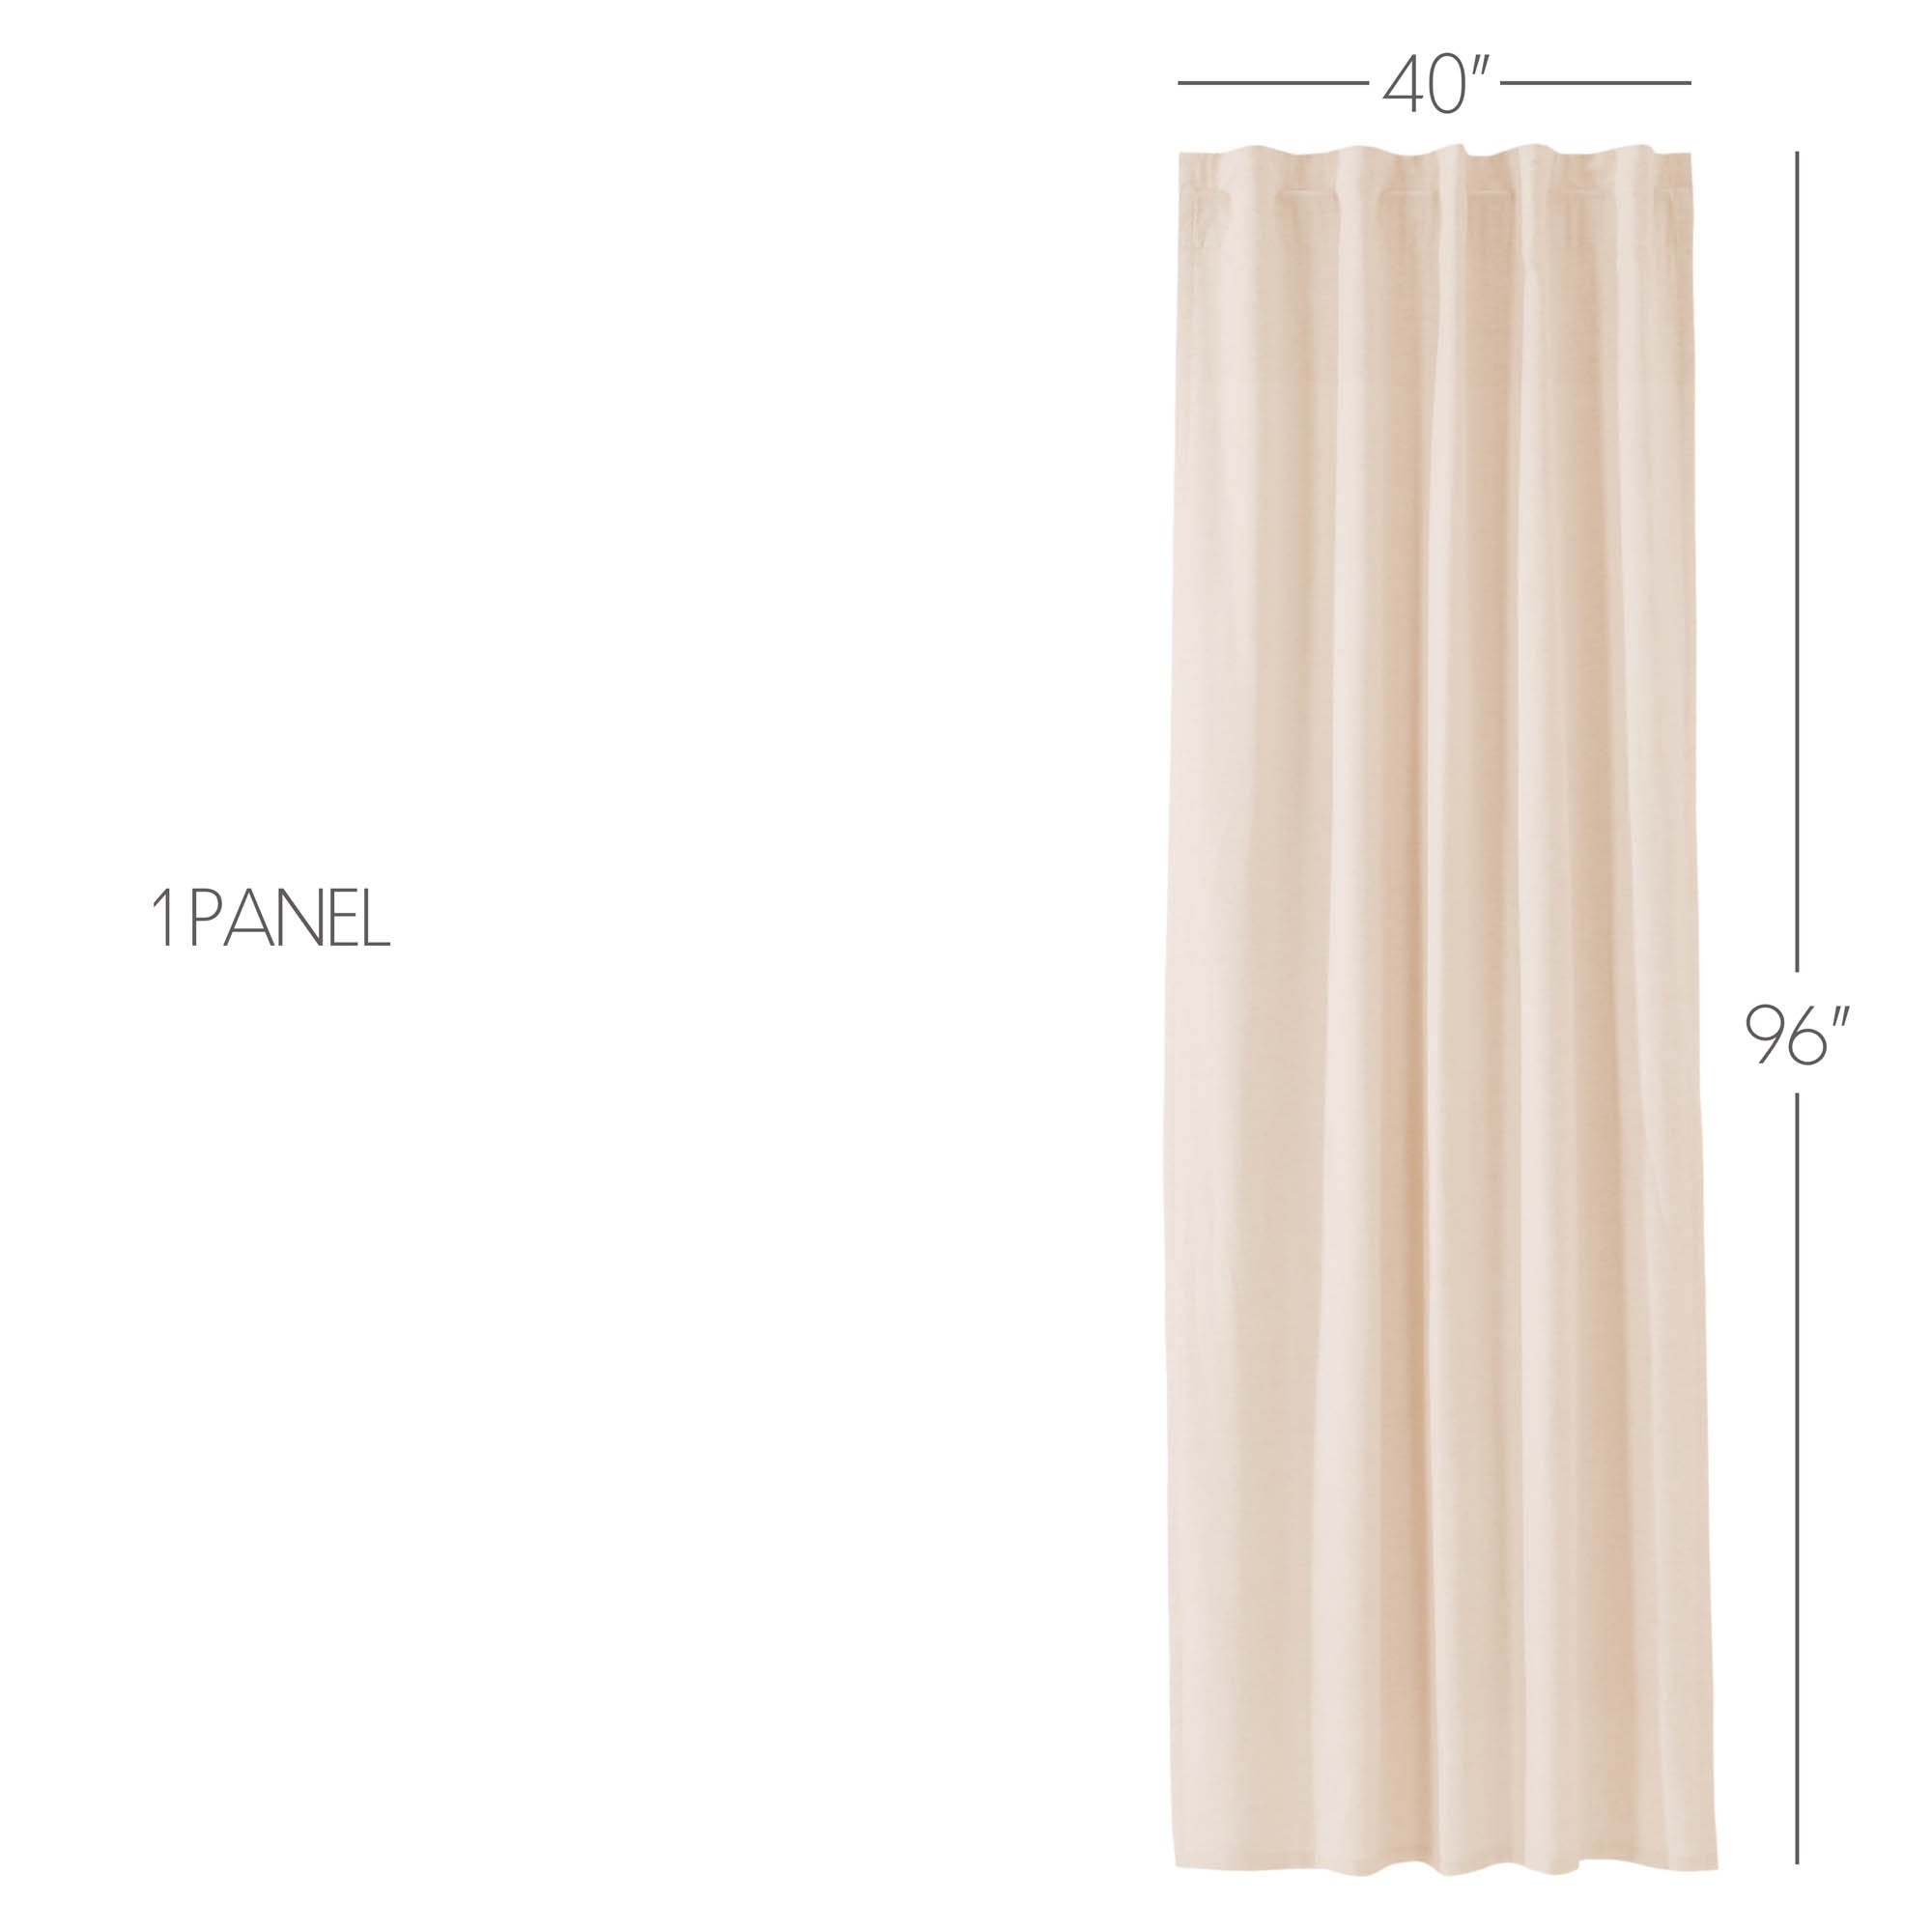 Simple Life Flax Natural Panel Curtain 96"x40" VHC Brands